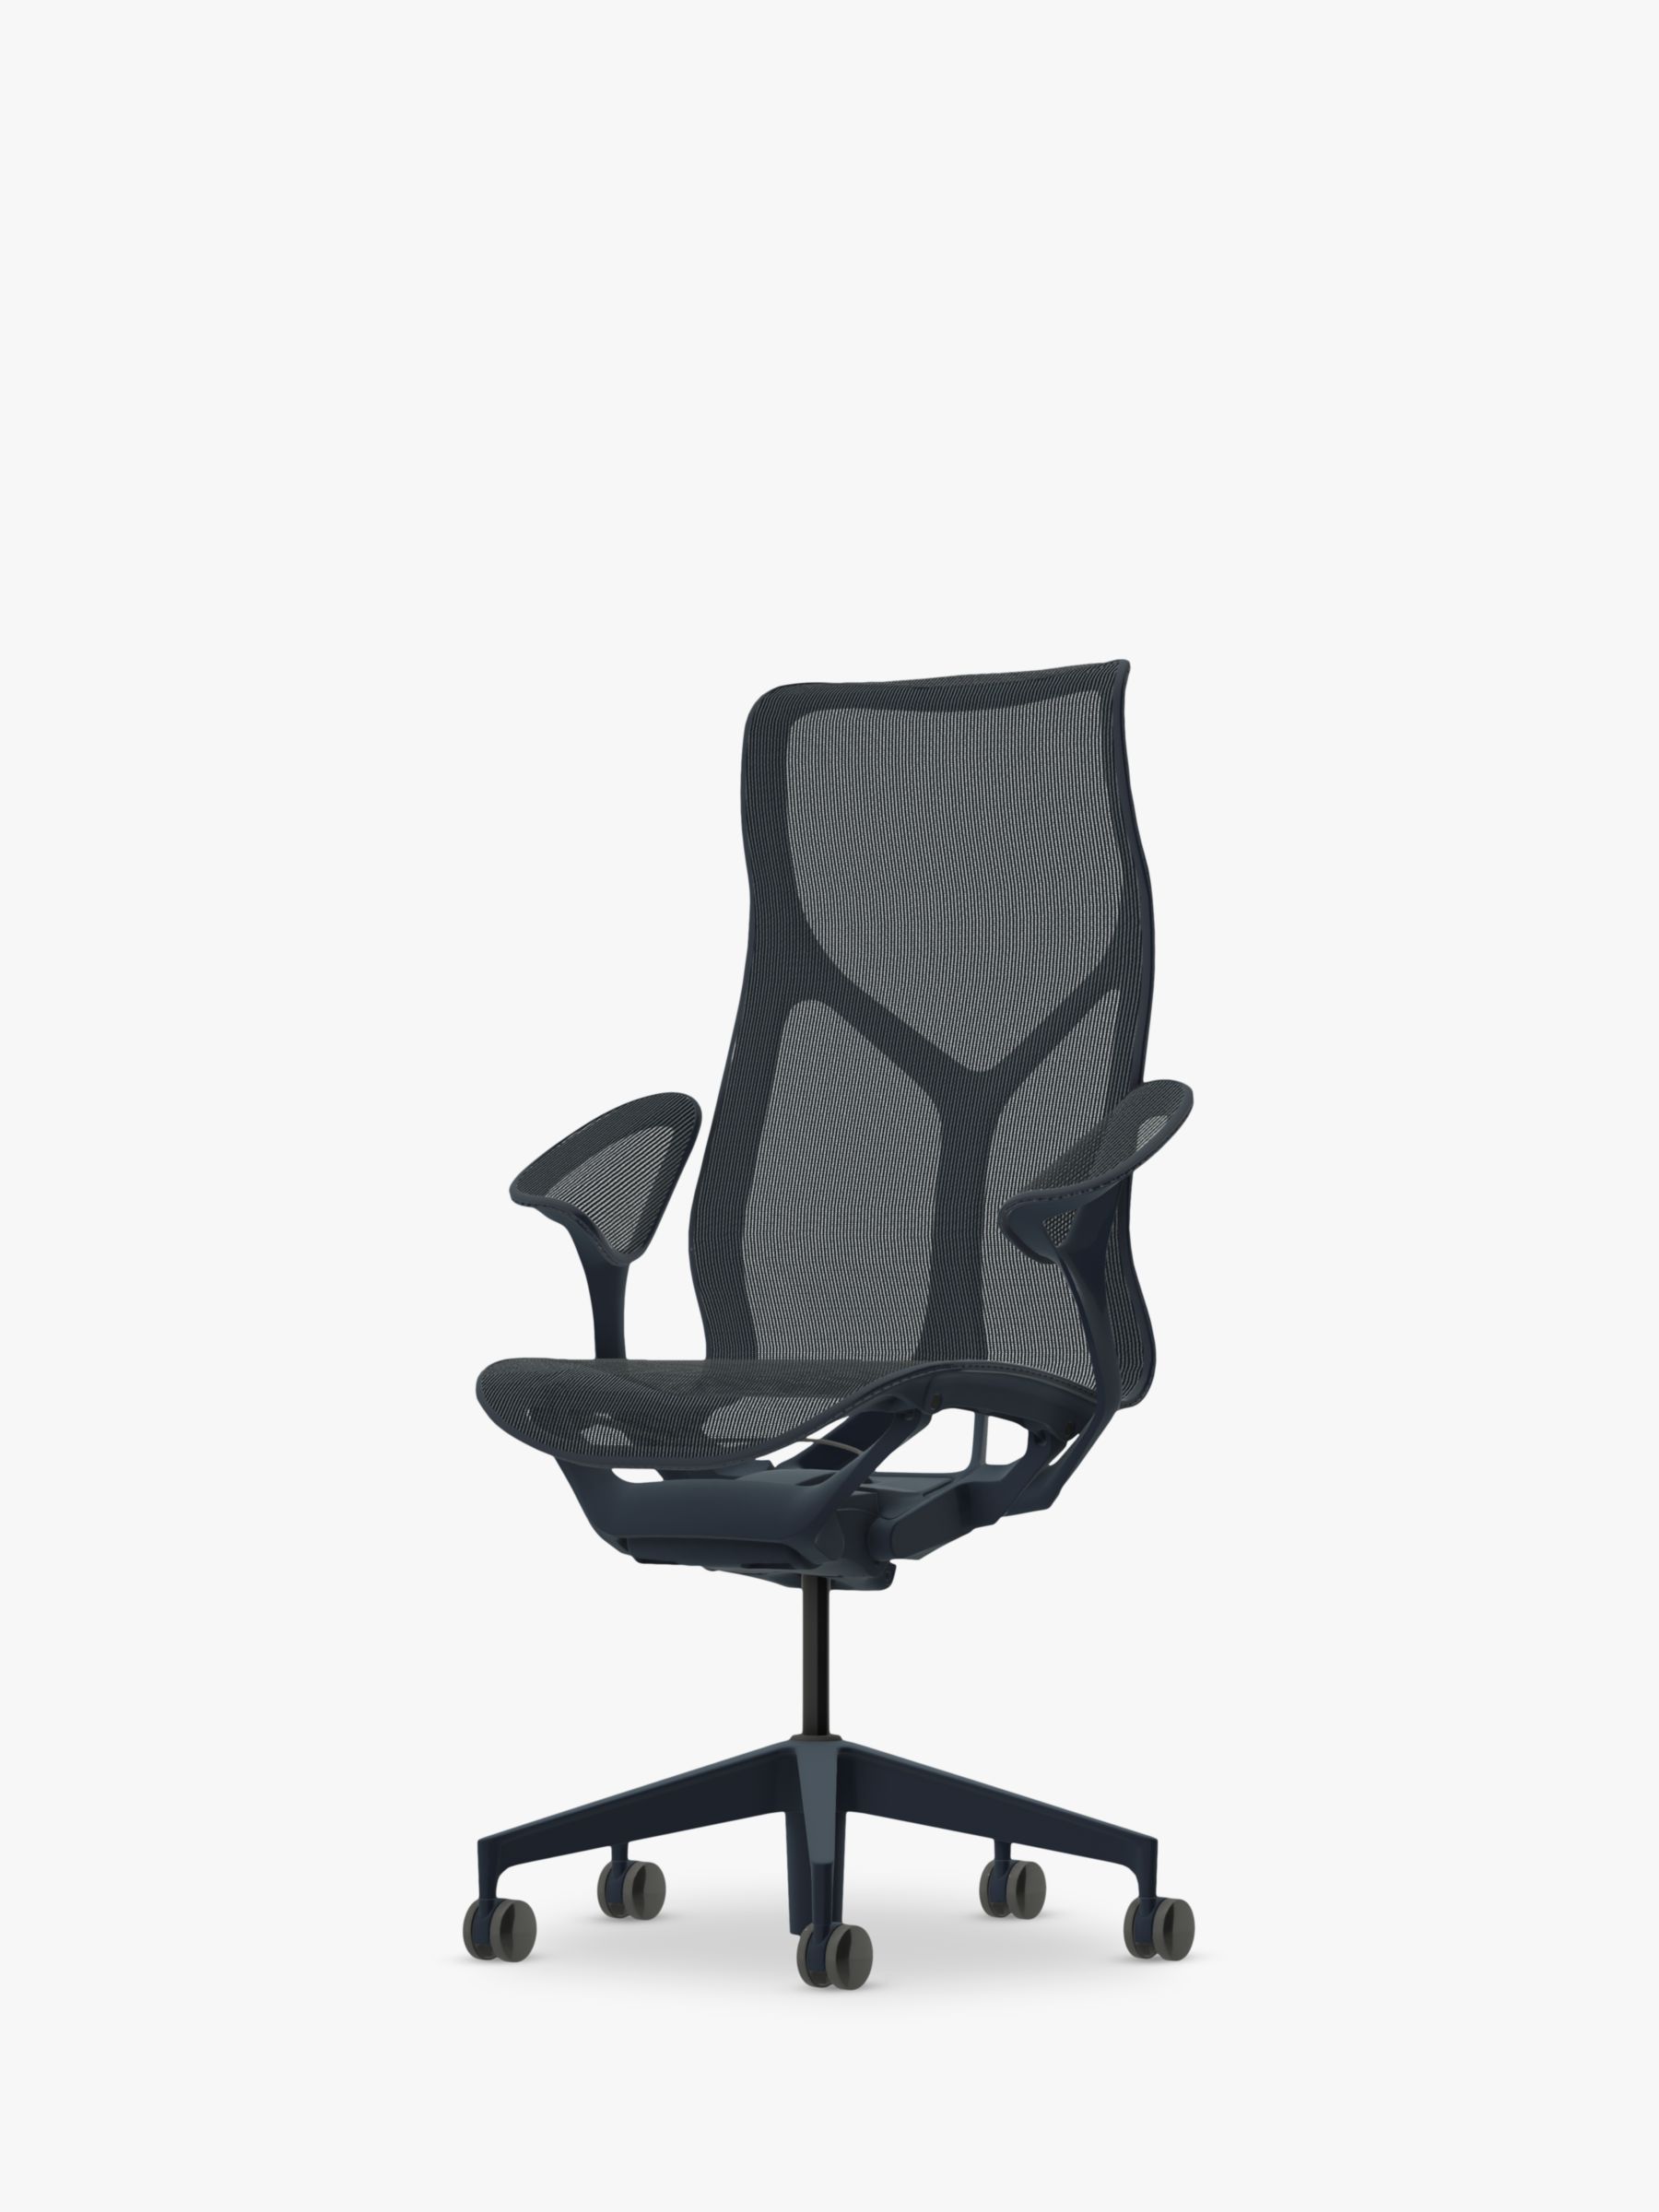 Photo of Herman miller cosm high back office chair